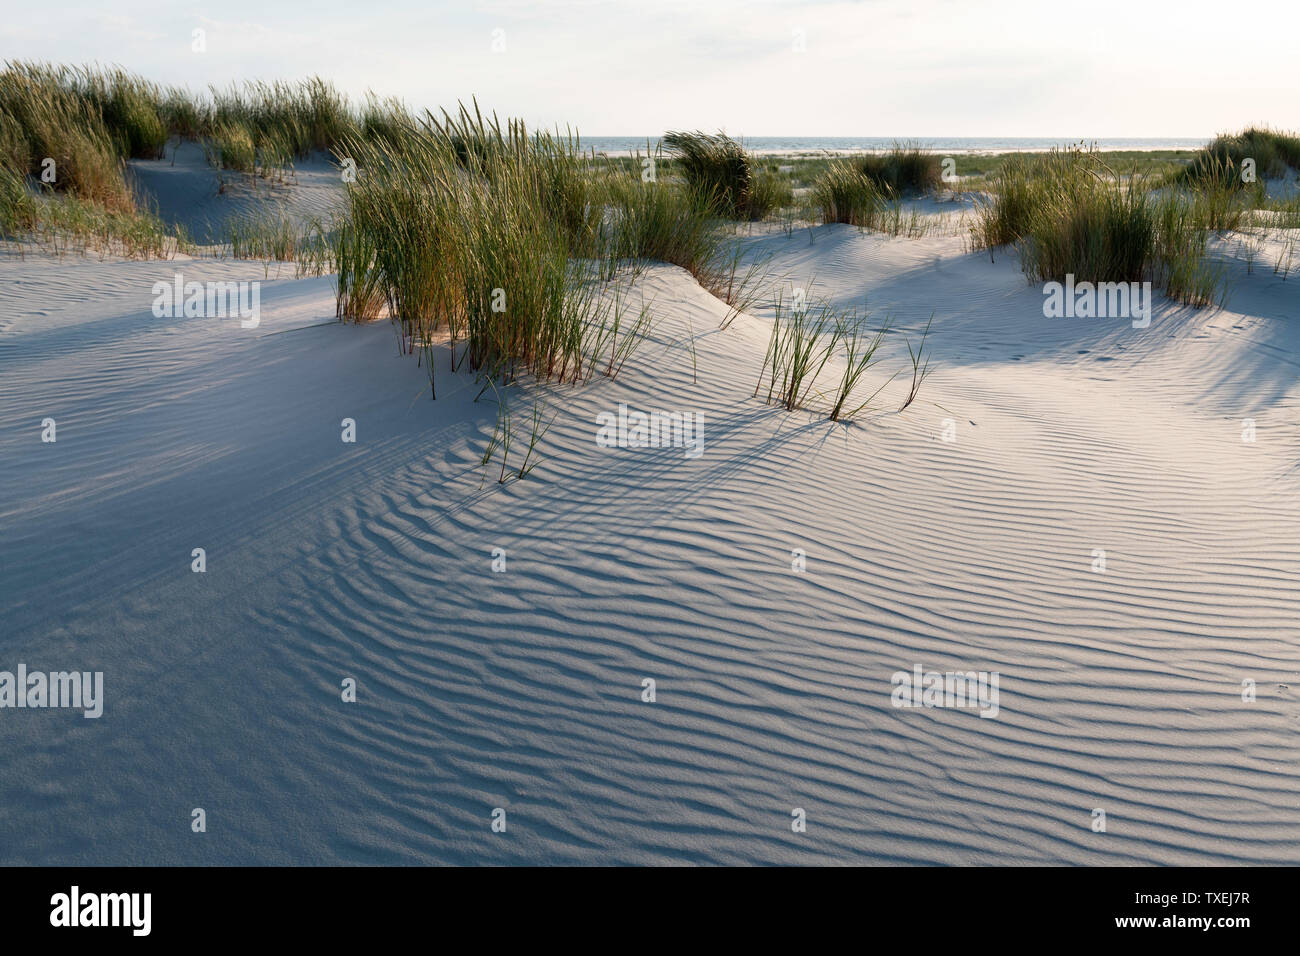 Great wavy sand surfaces in the dunes framed by green grasses. Stock Photo